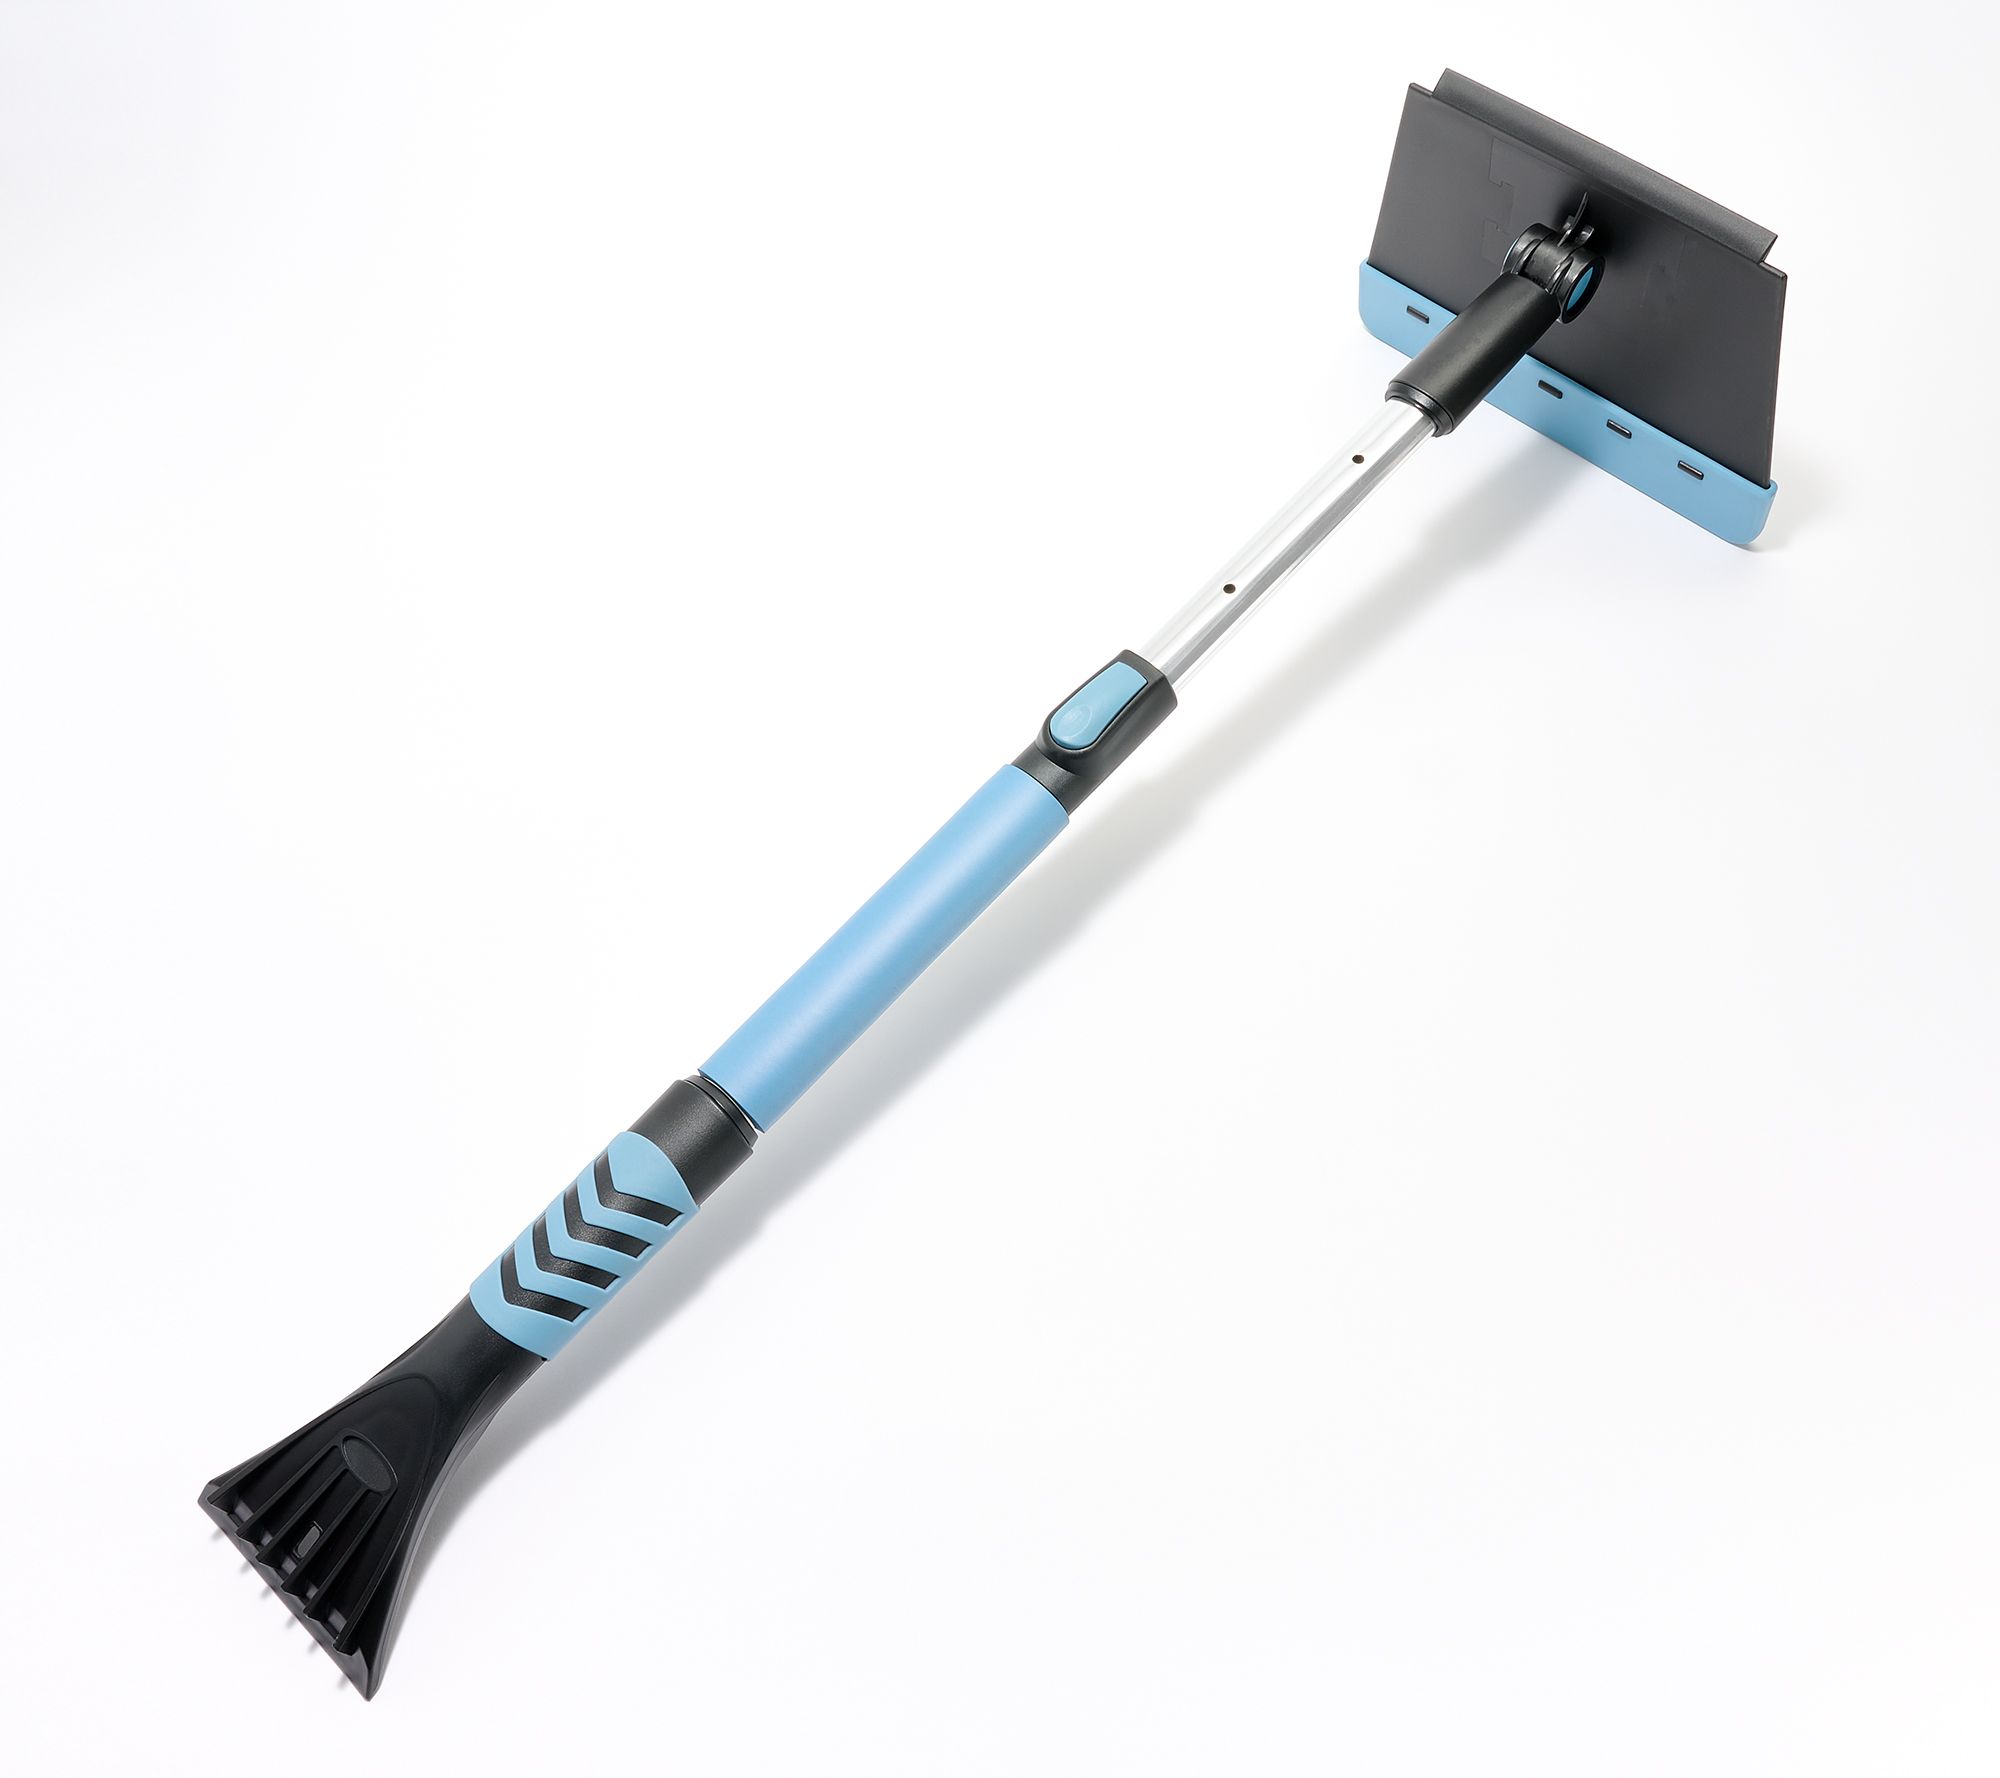 New Arrival Portable Telescopic Roof Cleaning Brush Ice Shovel